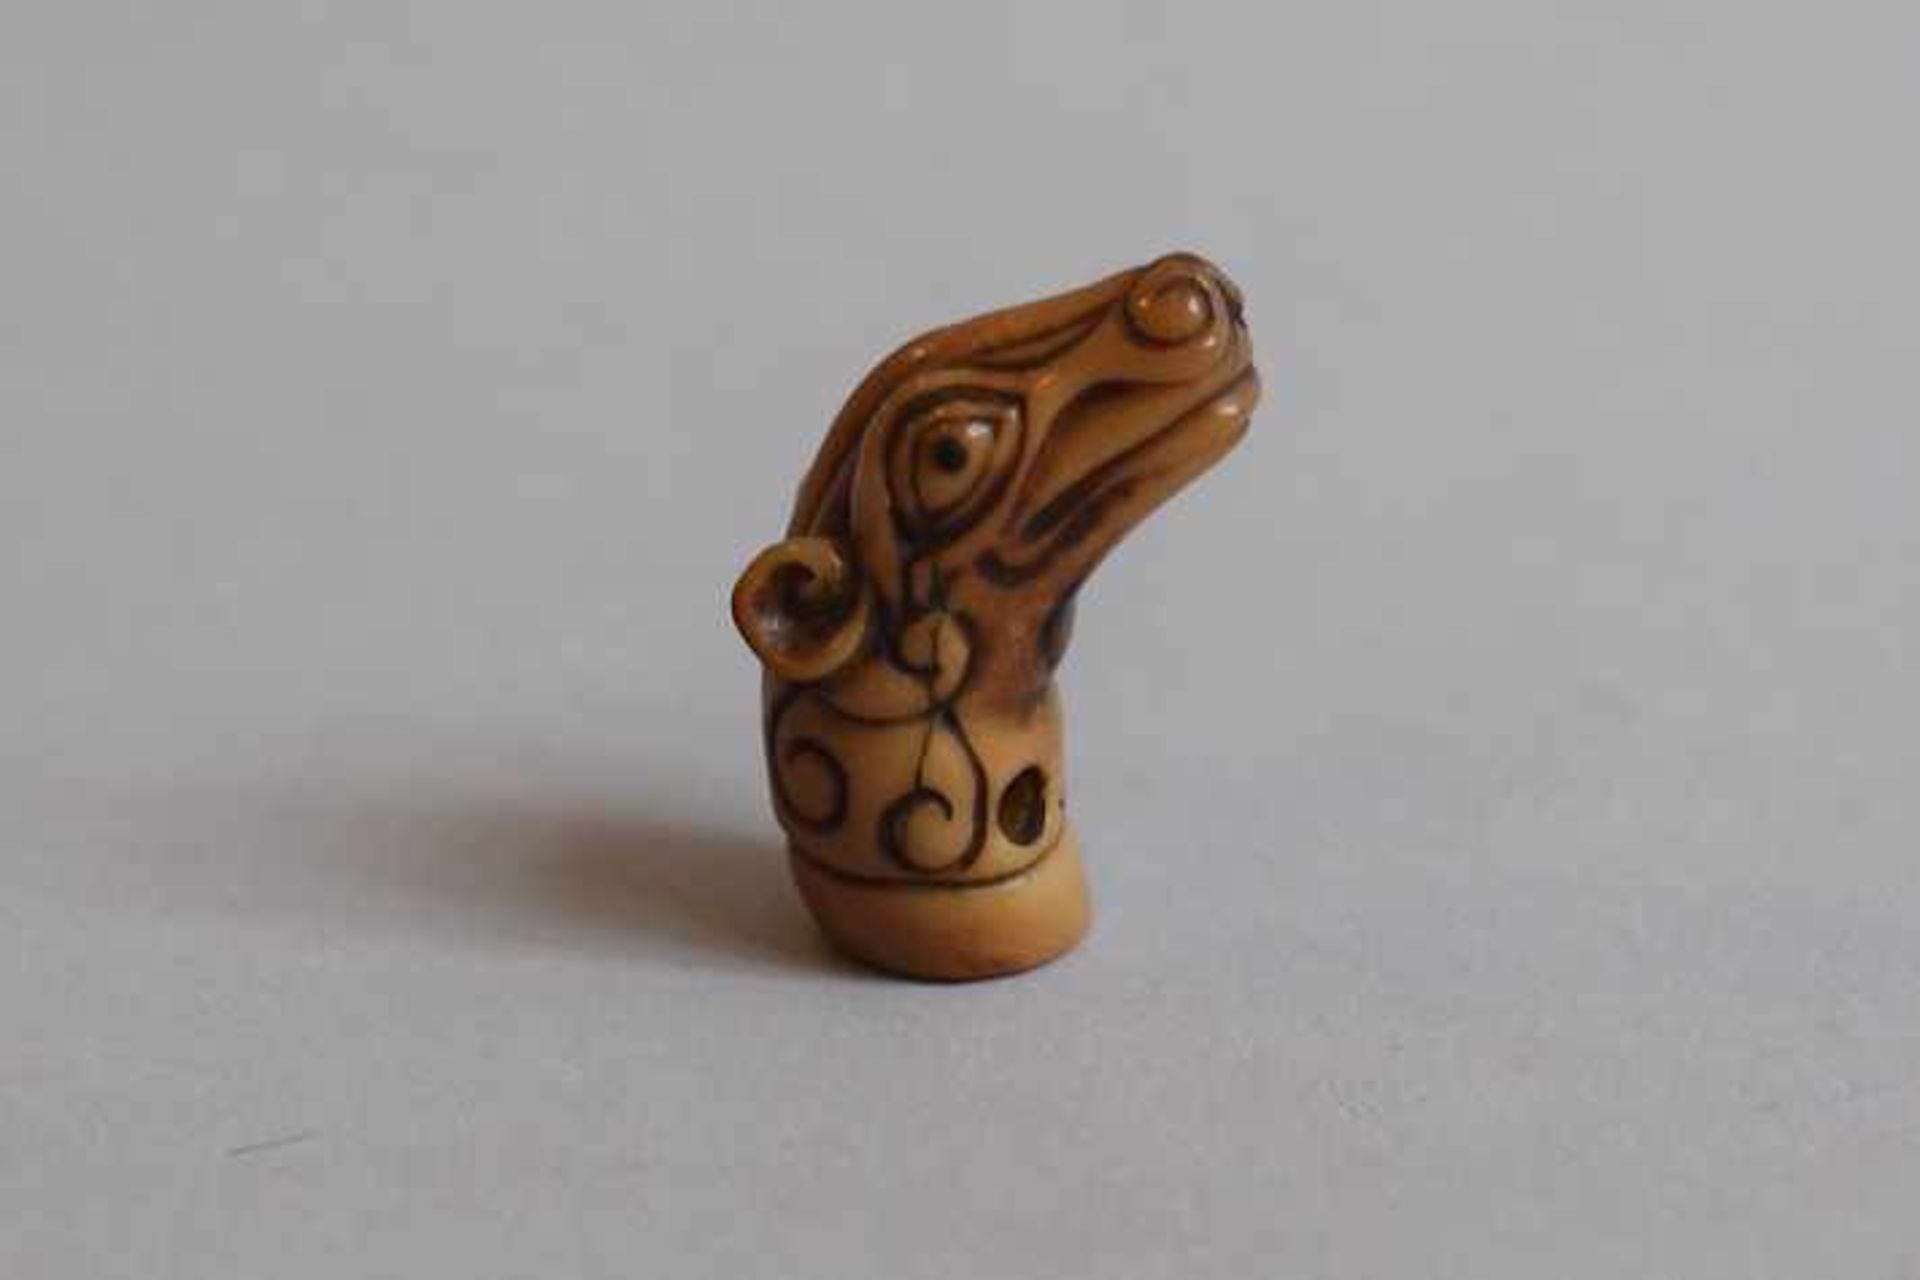 Palm Nut Seal Netsuke Anonymous artist Carved as the head of a mythical deer-like creature with